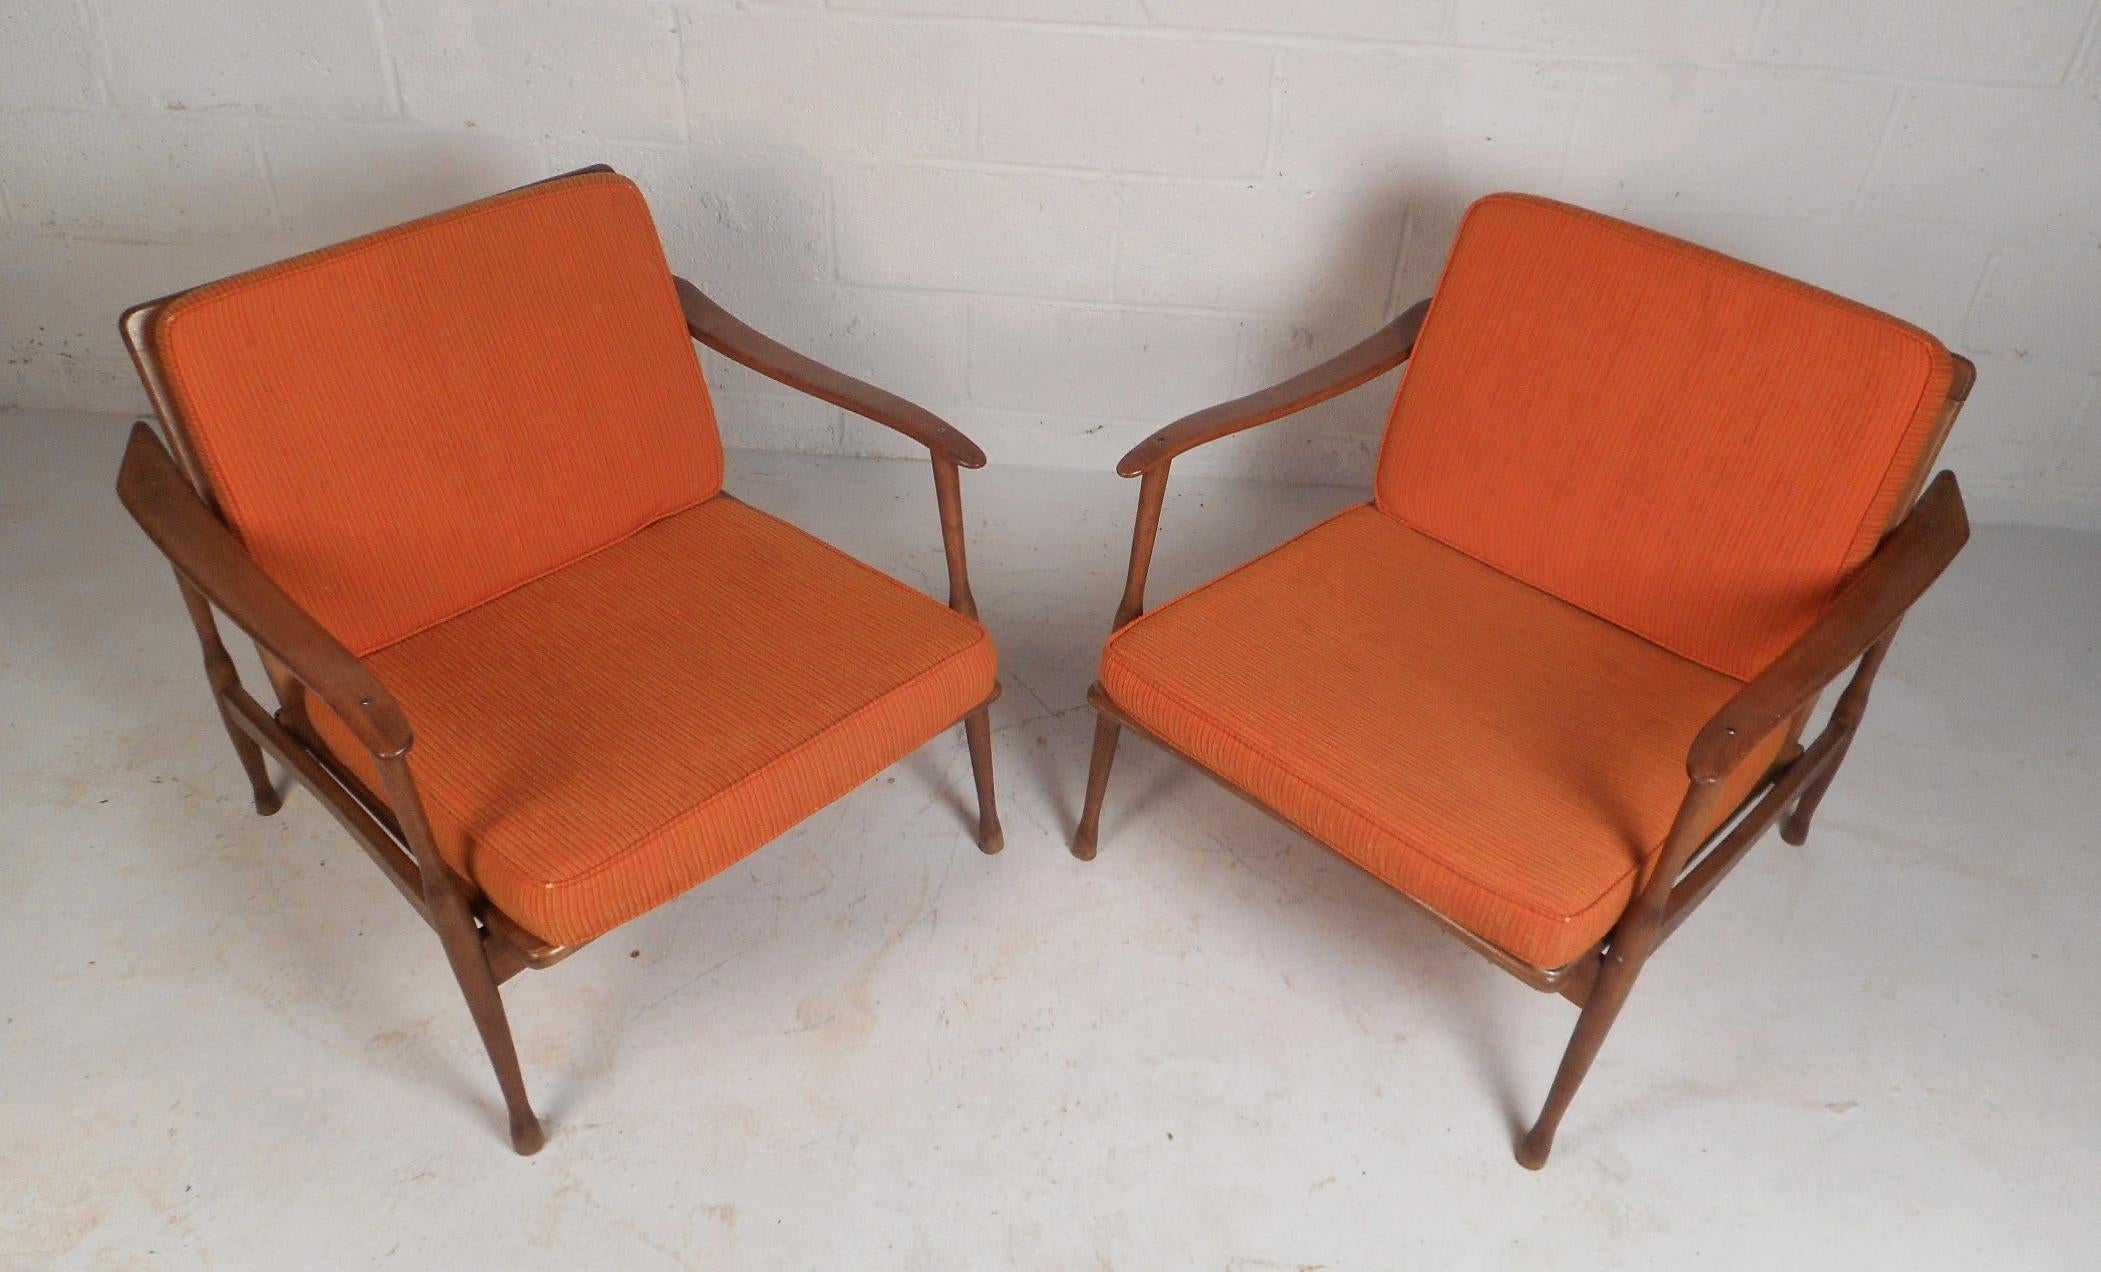 These Danish lounge chairs feature a sleek walnut frame with curved arm rests and smooth edges that offer plenty of comfort without sacrificing style. This pair of midcentury chairs feature tapered legs that end at sculpted feet for a stable